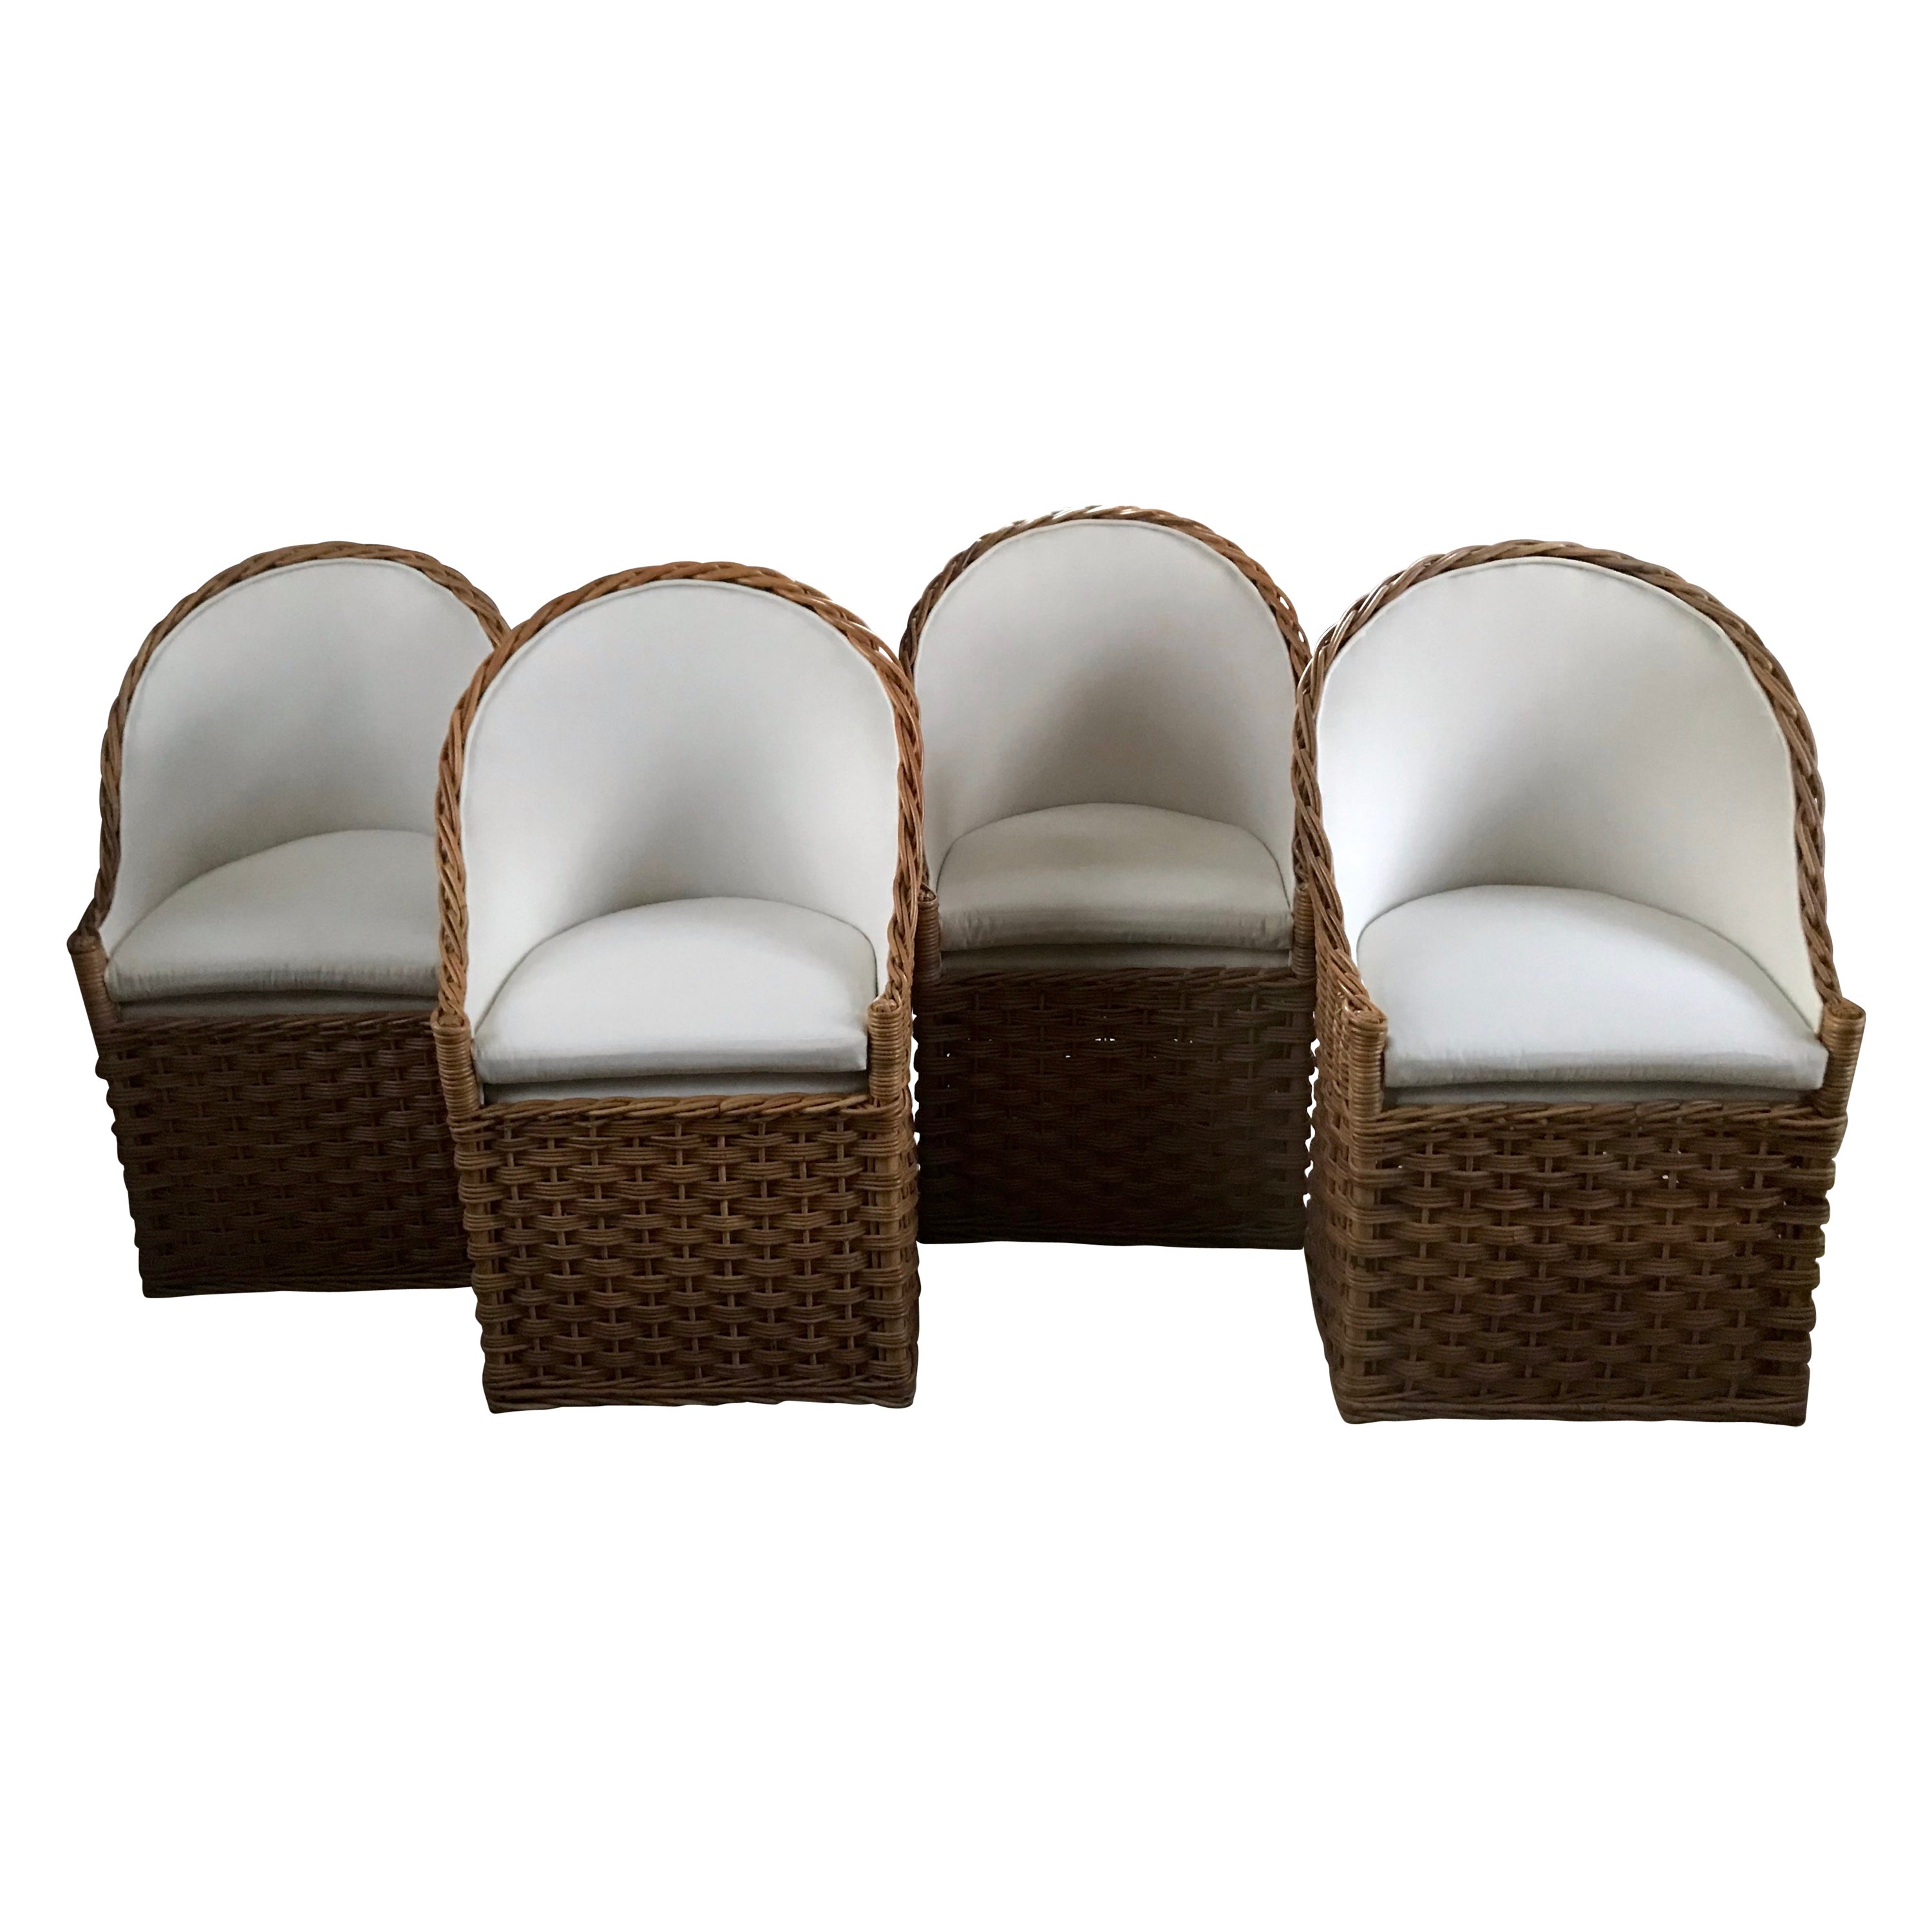 Set of Four Natural Wicker Barrel Back Chairs For Sale